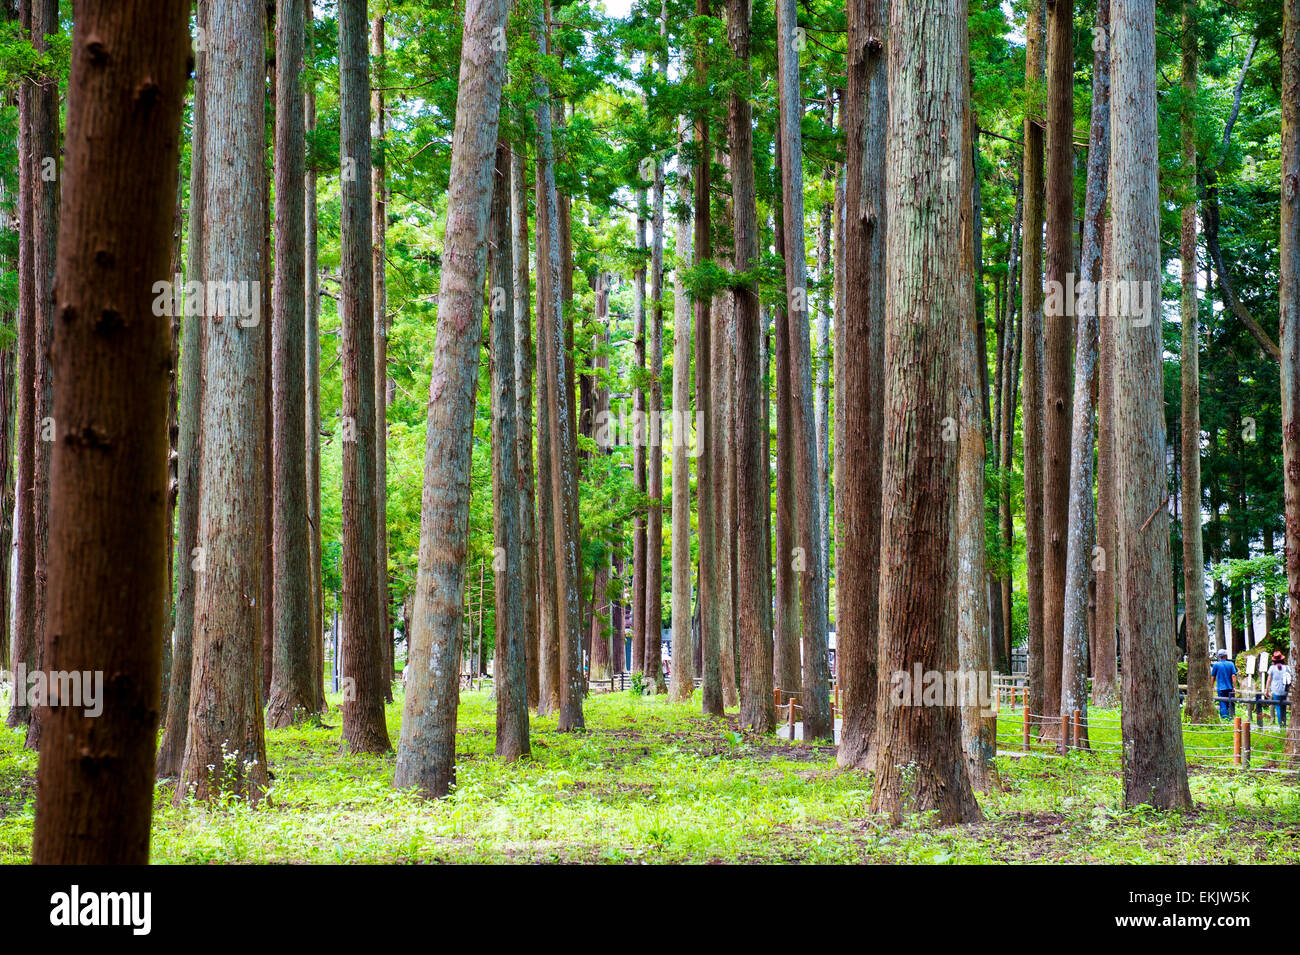 Field of tall Trees in a forest with greenery, moss , grass in the summer Stock Photo